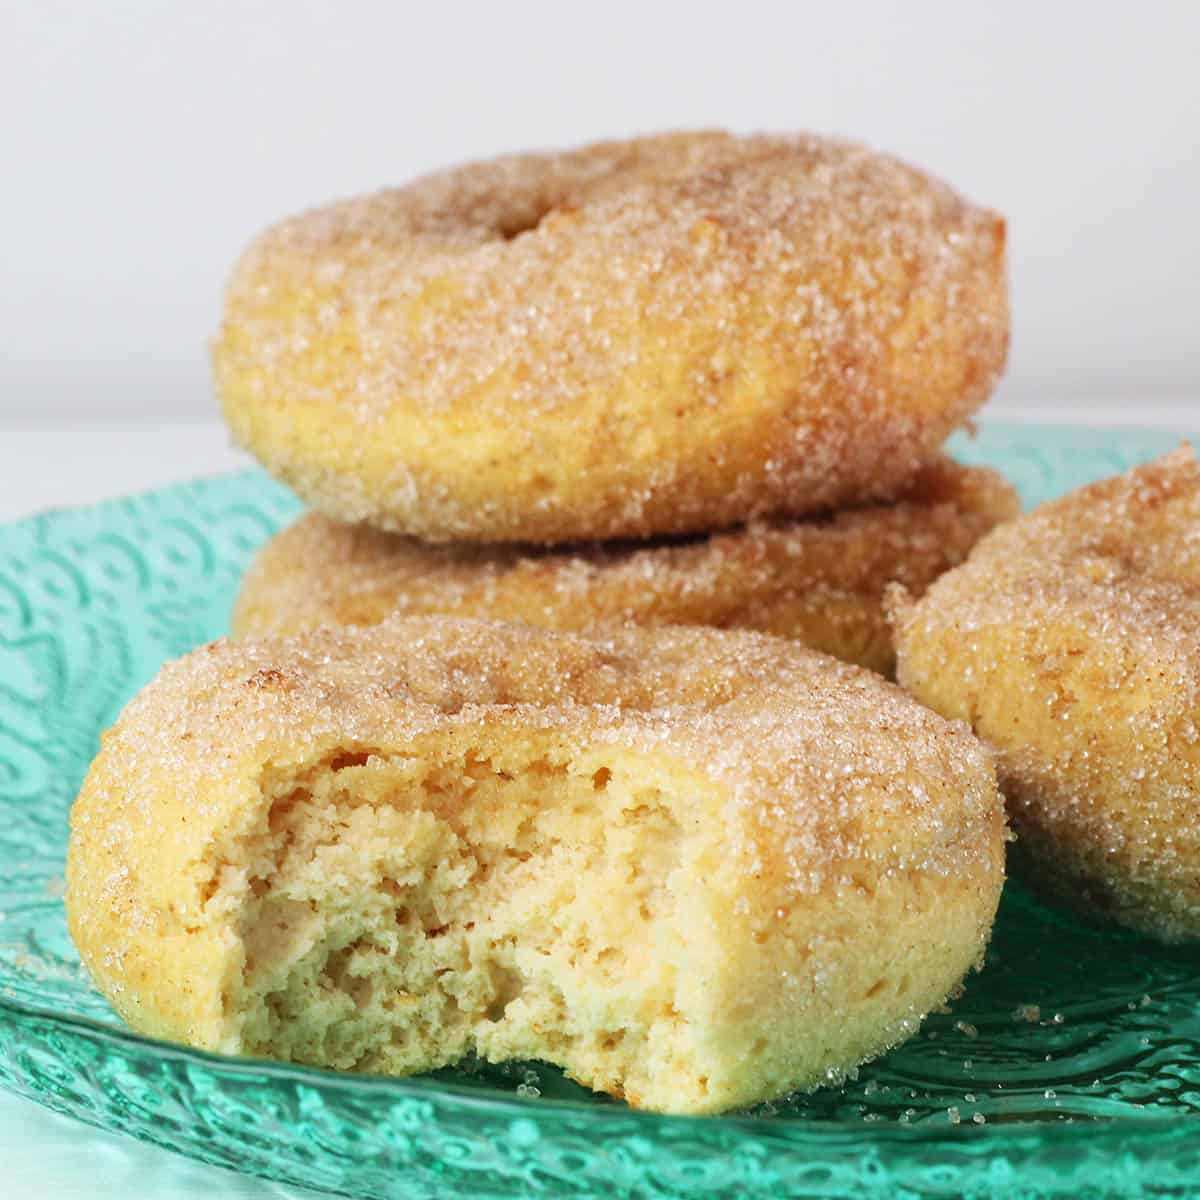 three full and one bitten vanilla cake donut covered in cinnamon erythritol on a bright green glass plate